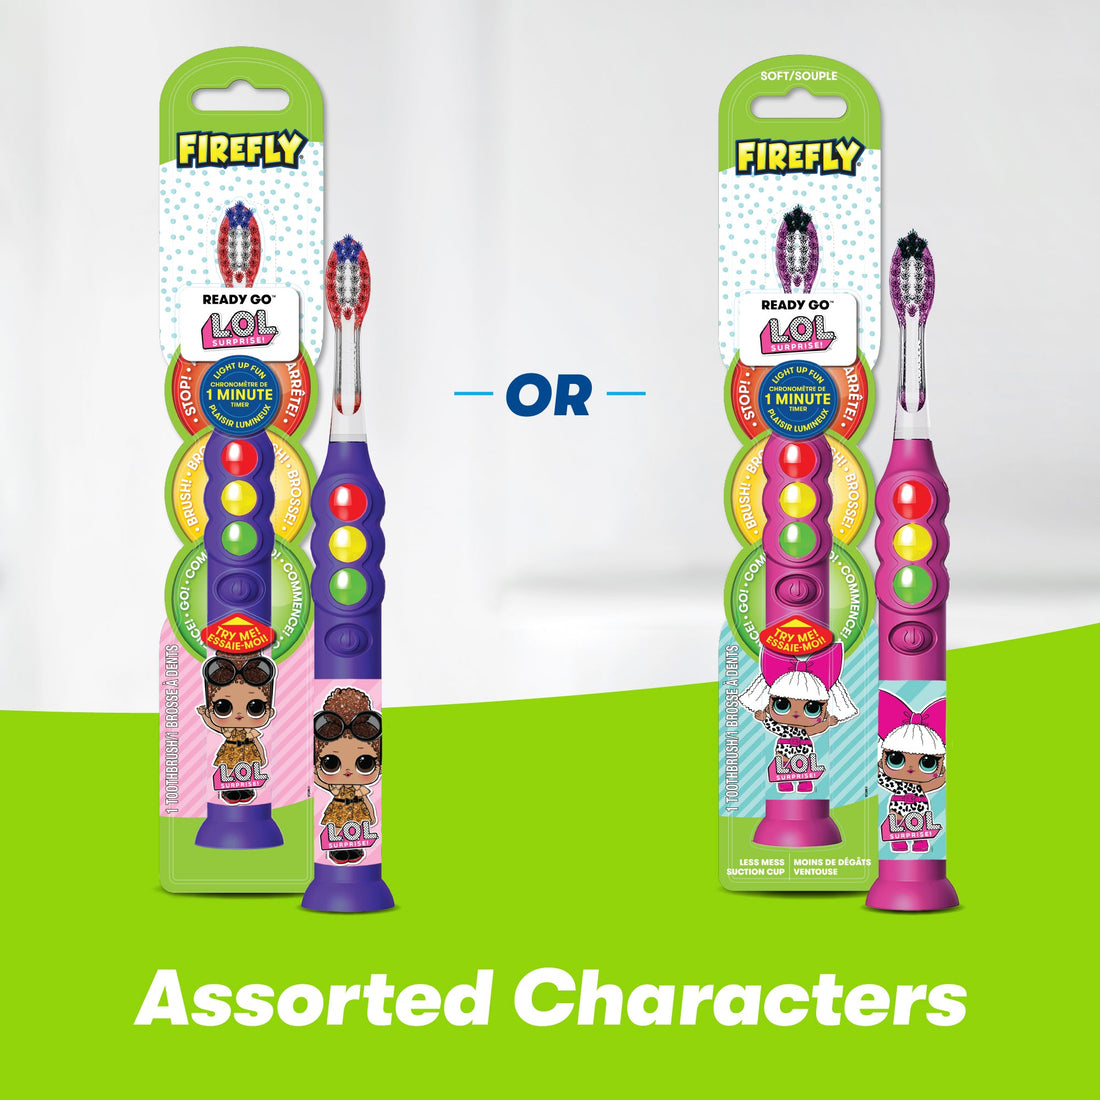 Firefly Ready Go L.O.L. SURPRISE! Light Up Timer Toothbrush, Purple or Pink, Assorted Characters